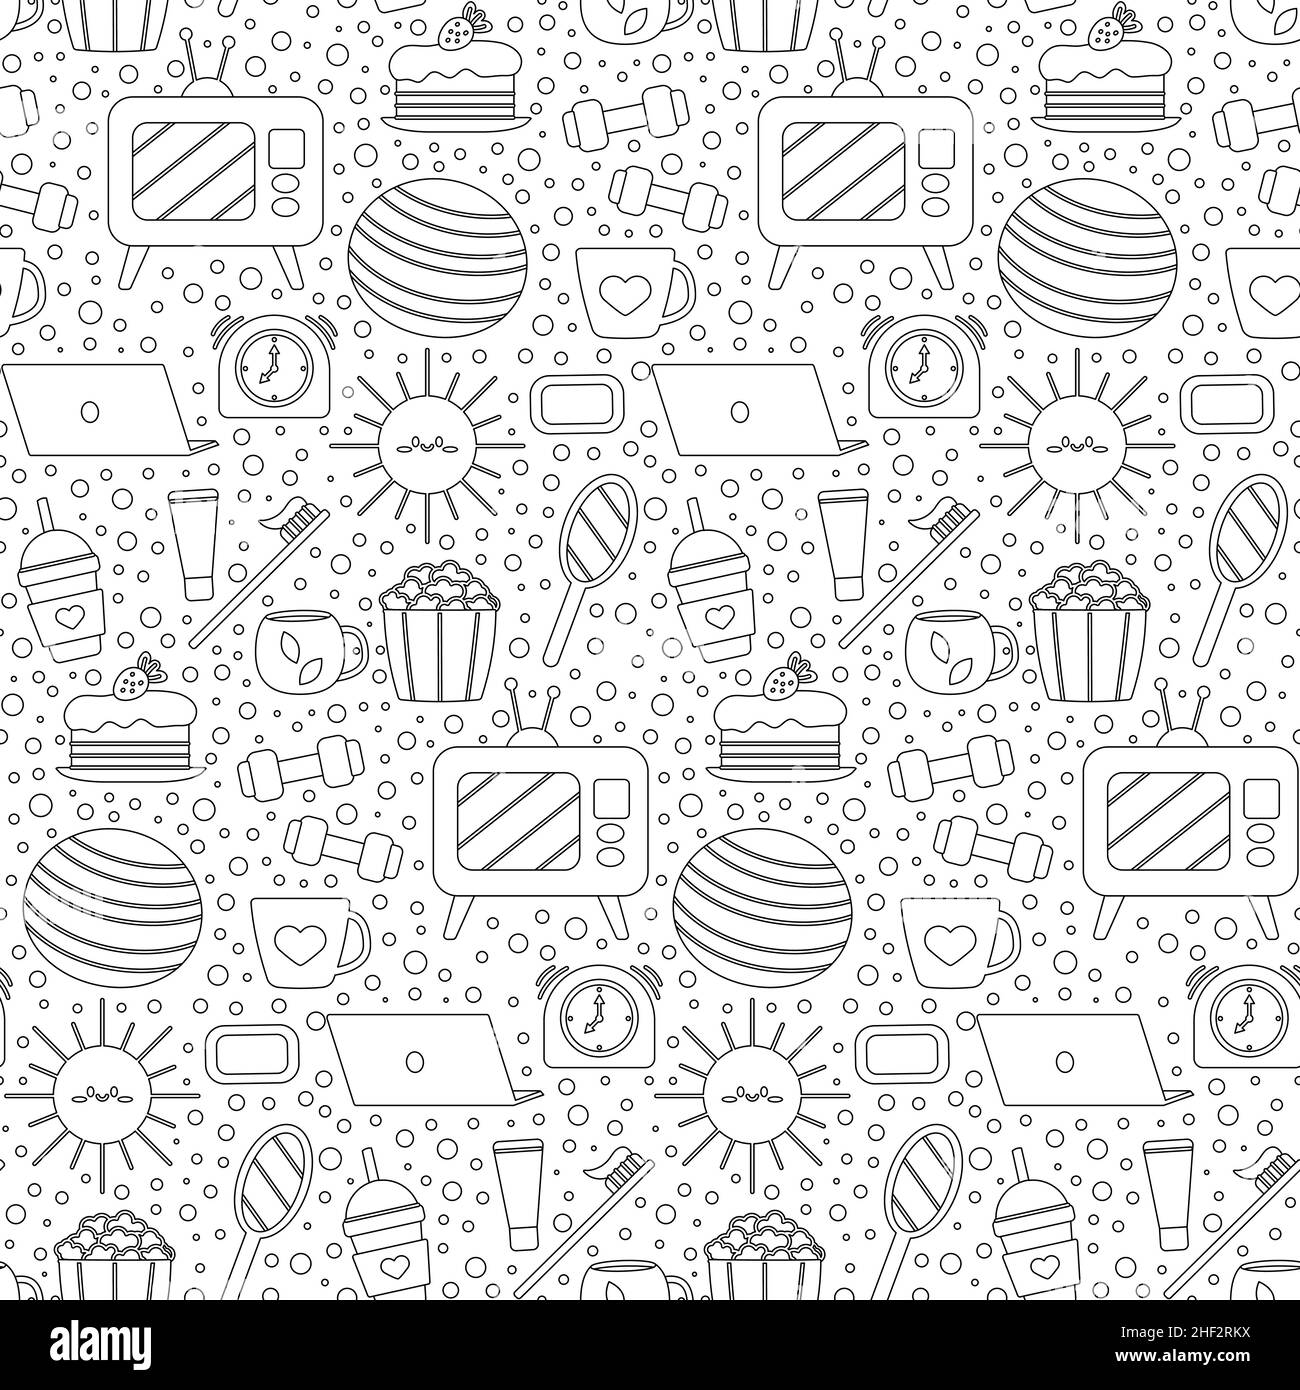 https://c8.alamy.com/comp/2HF2RKX/seamless-repeating-pattern-with-cozy-household-items-morning-and-evening-routine-vector-illustration-2HF2RKX.jpg